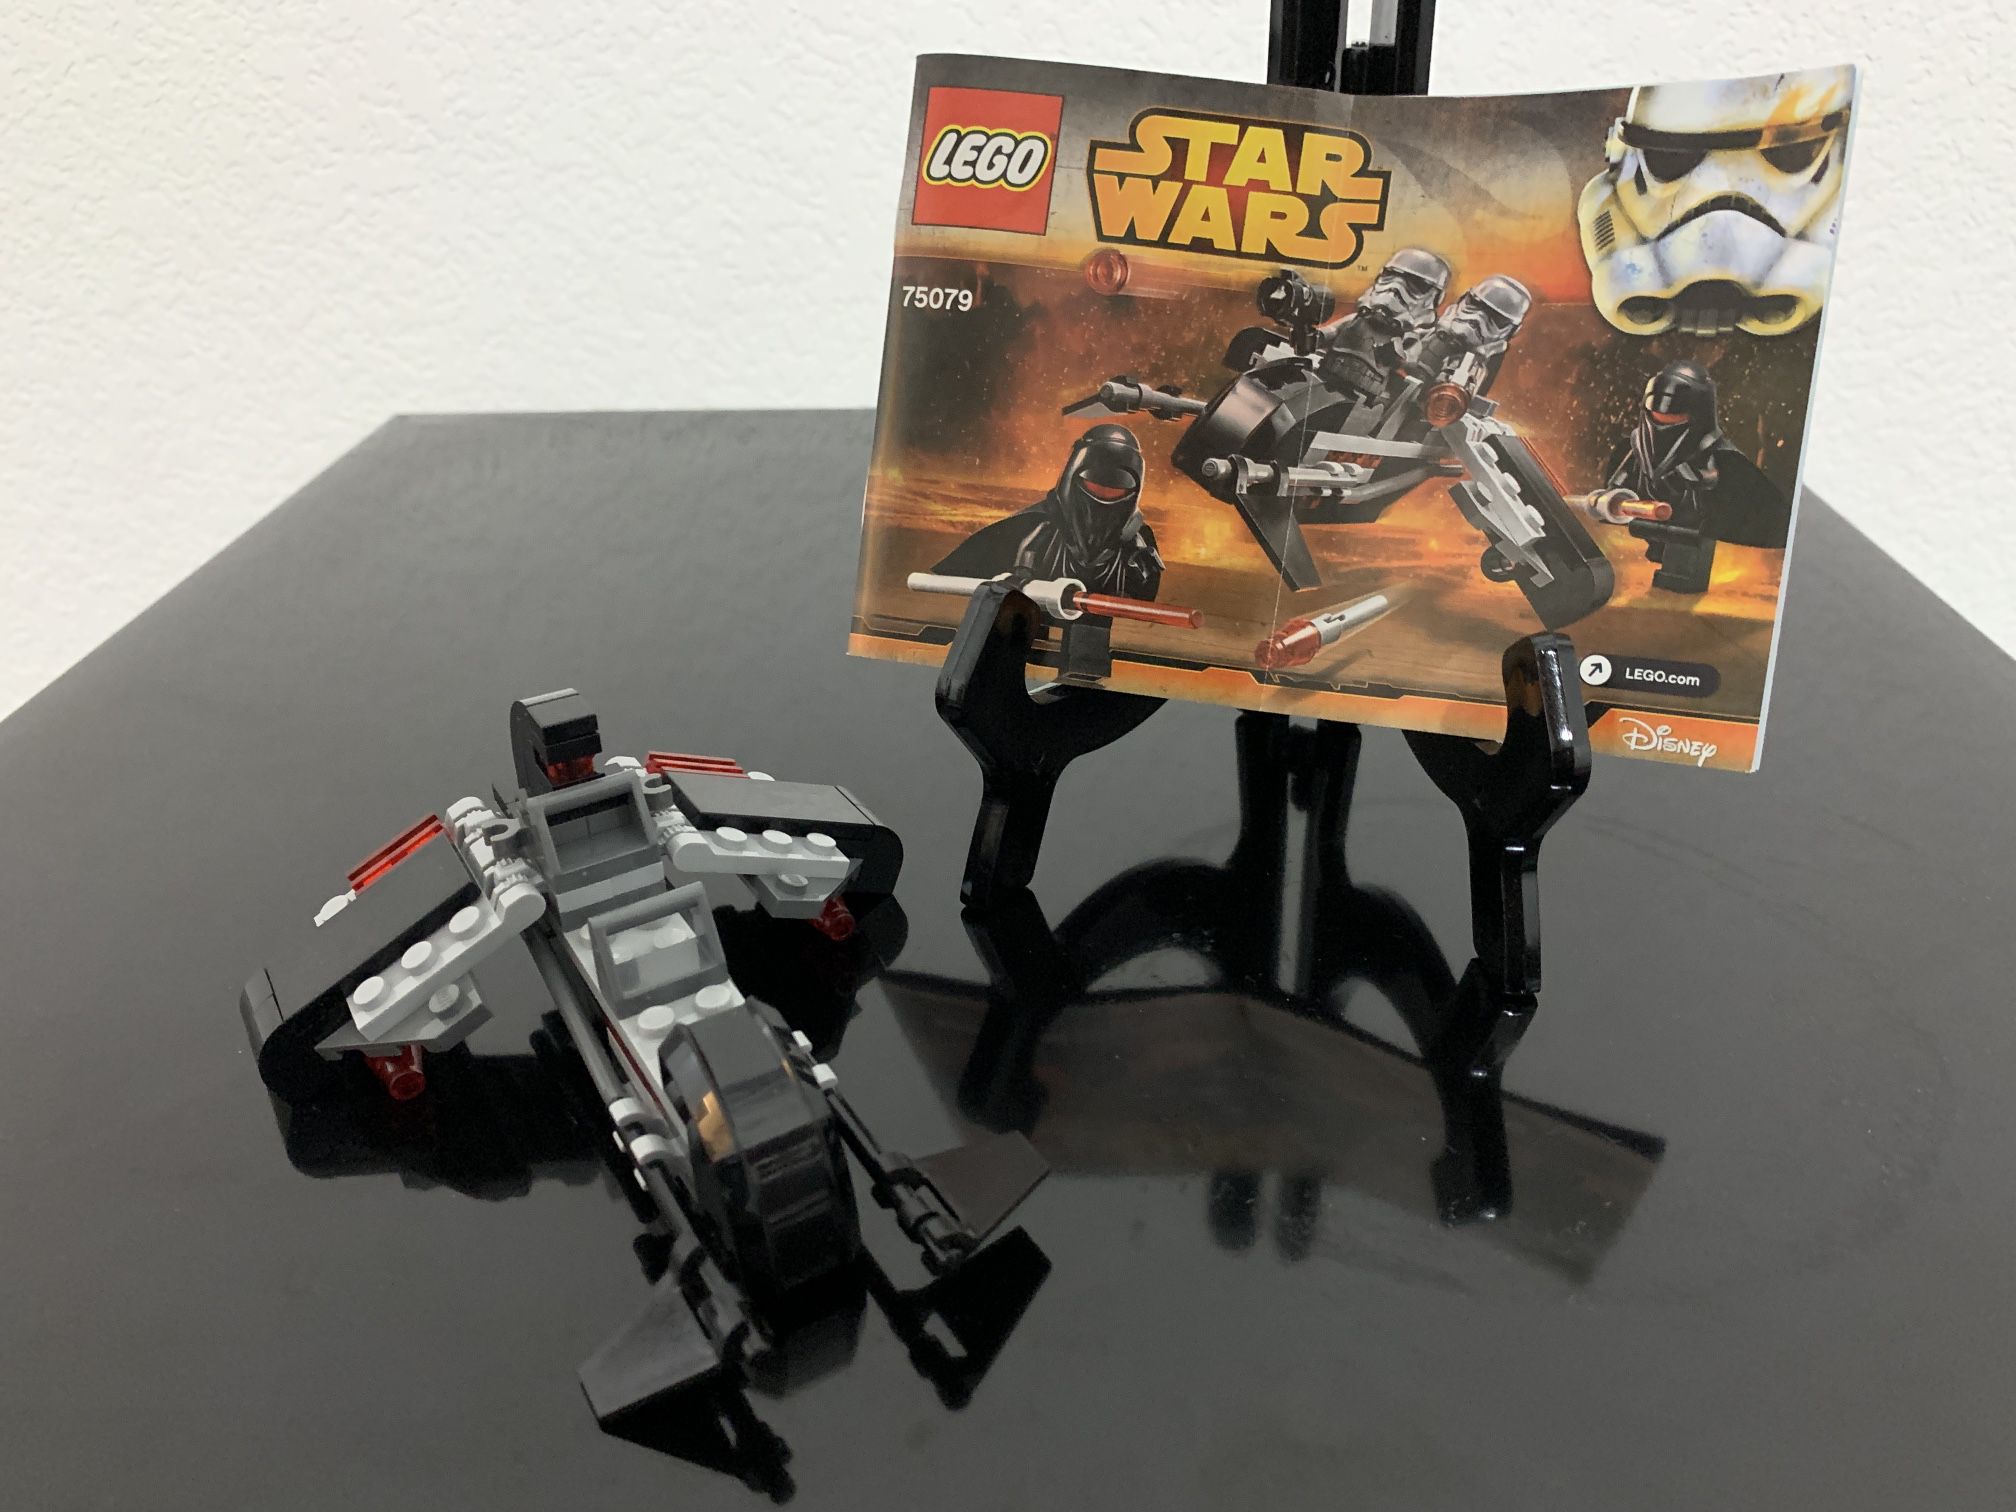 Lego Wars - Troopers - Set 75079 for in Wht Settlemt, TX OfferUp